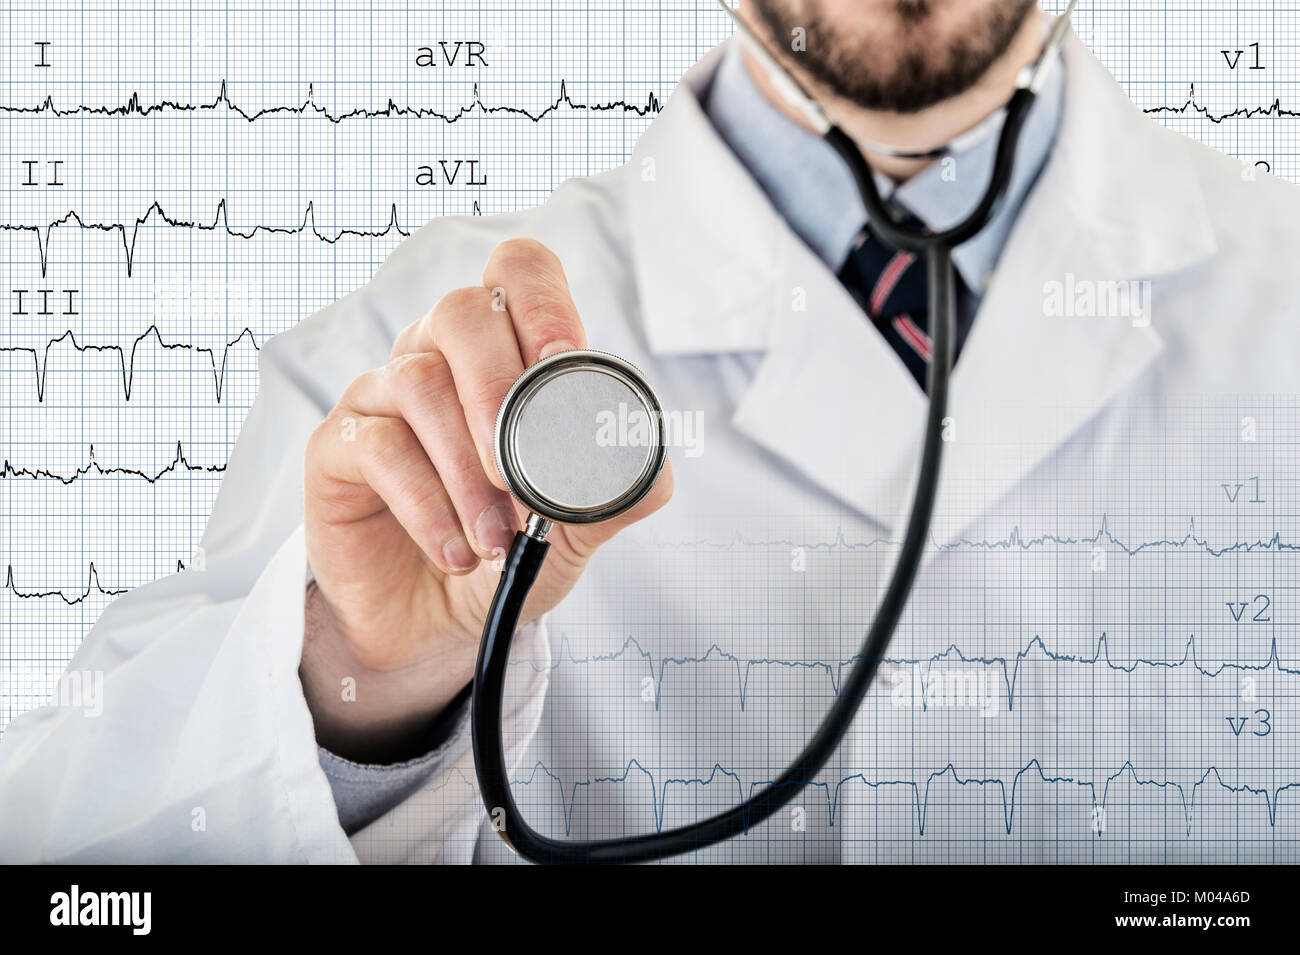 Male cardiologist doctor showing stethoscope for checkup with electrocardiogram in background Stock Photo